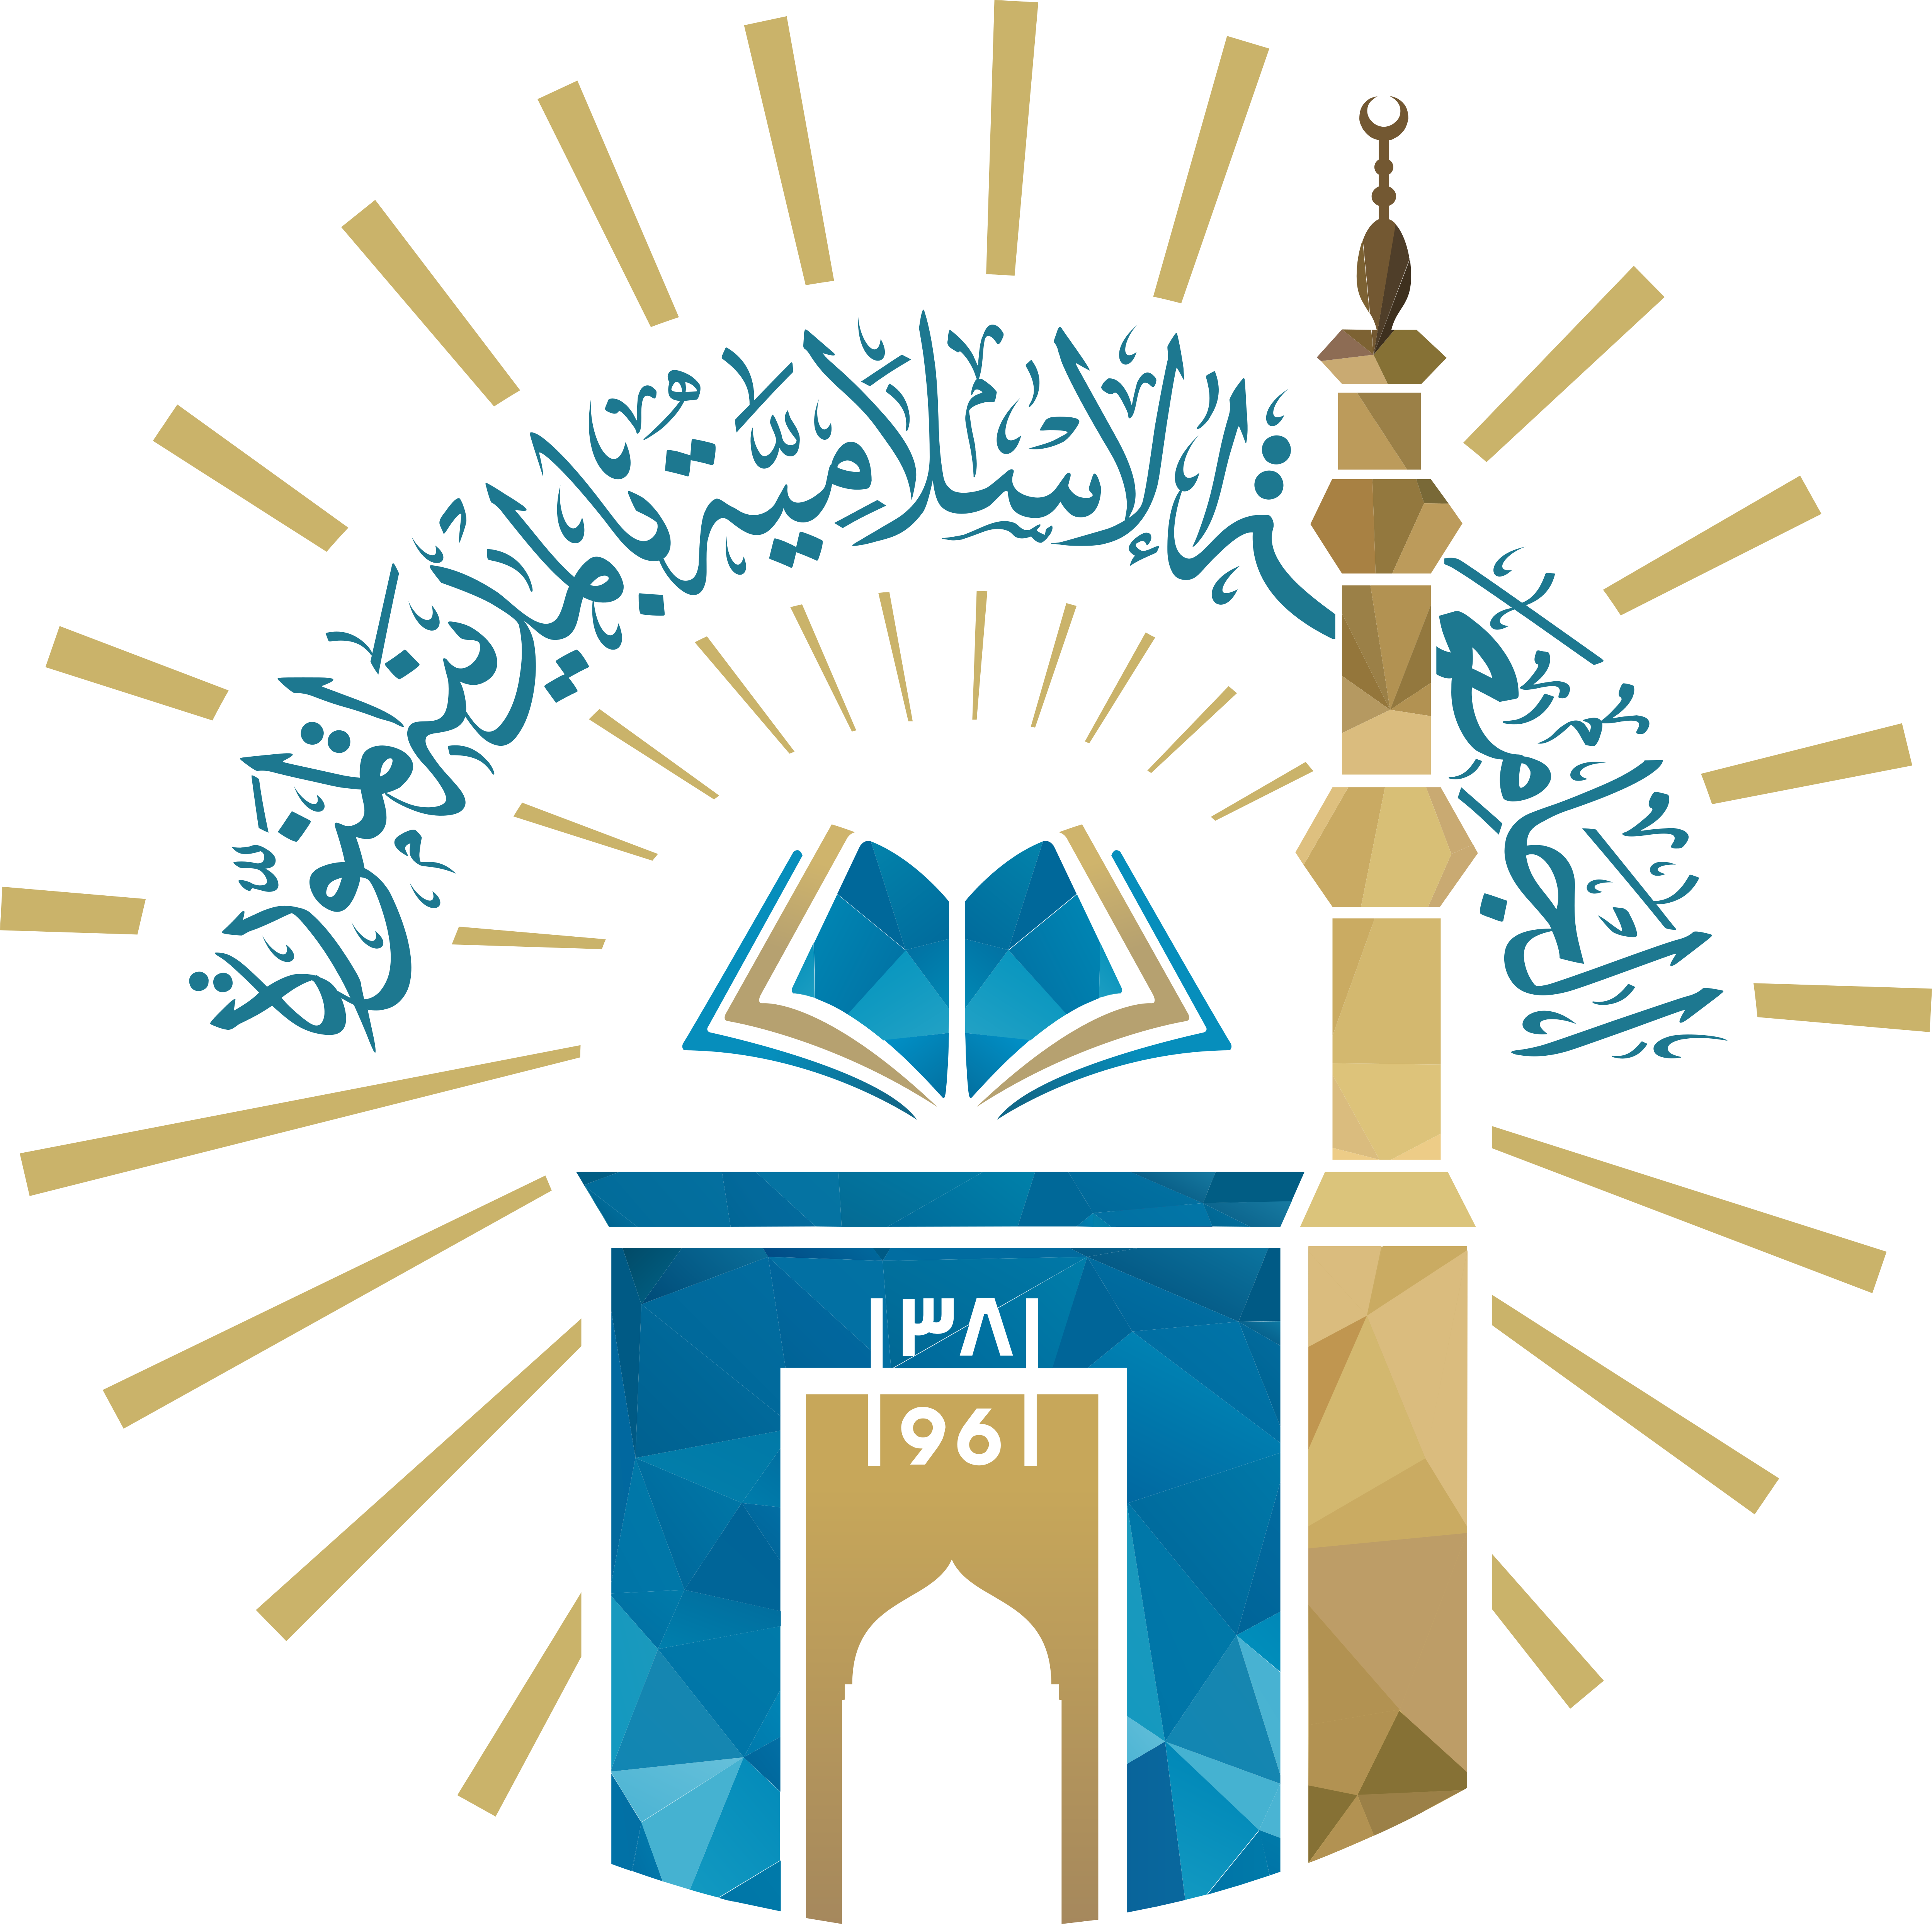 Islamic Architectureand Holy Book PNG